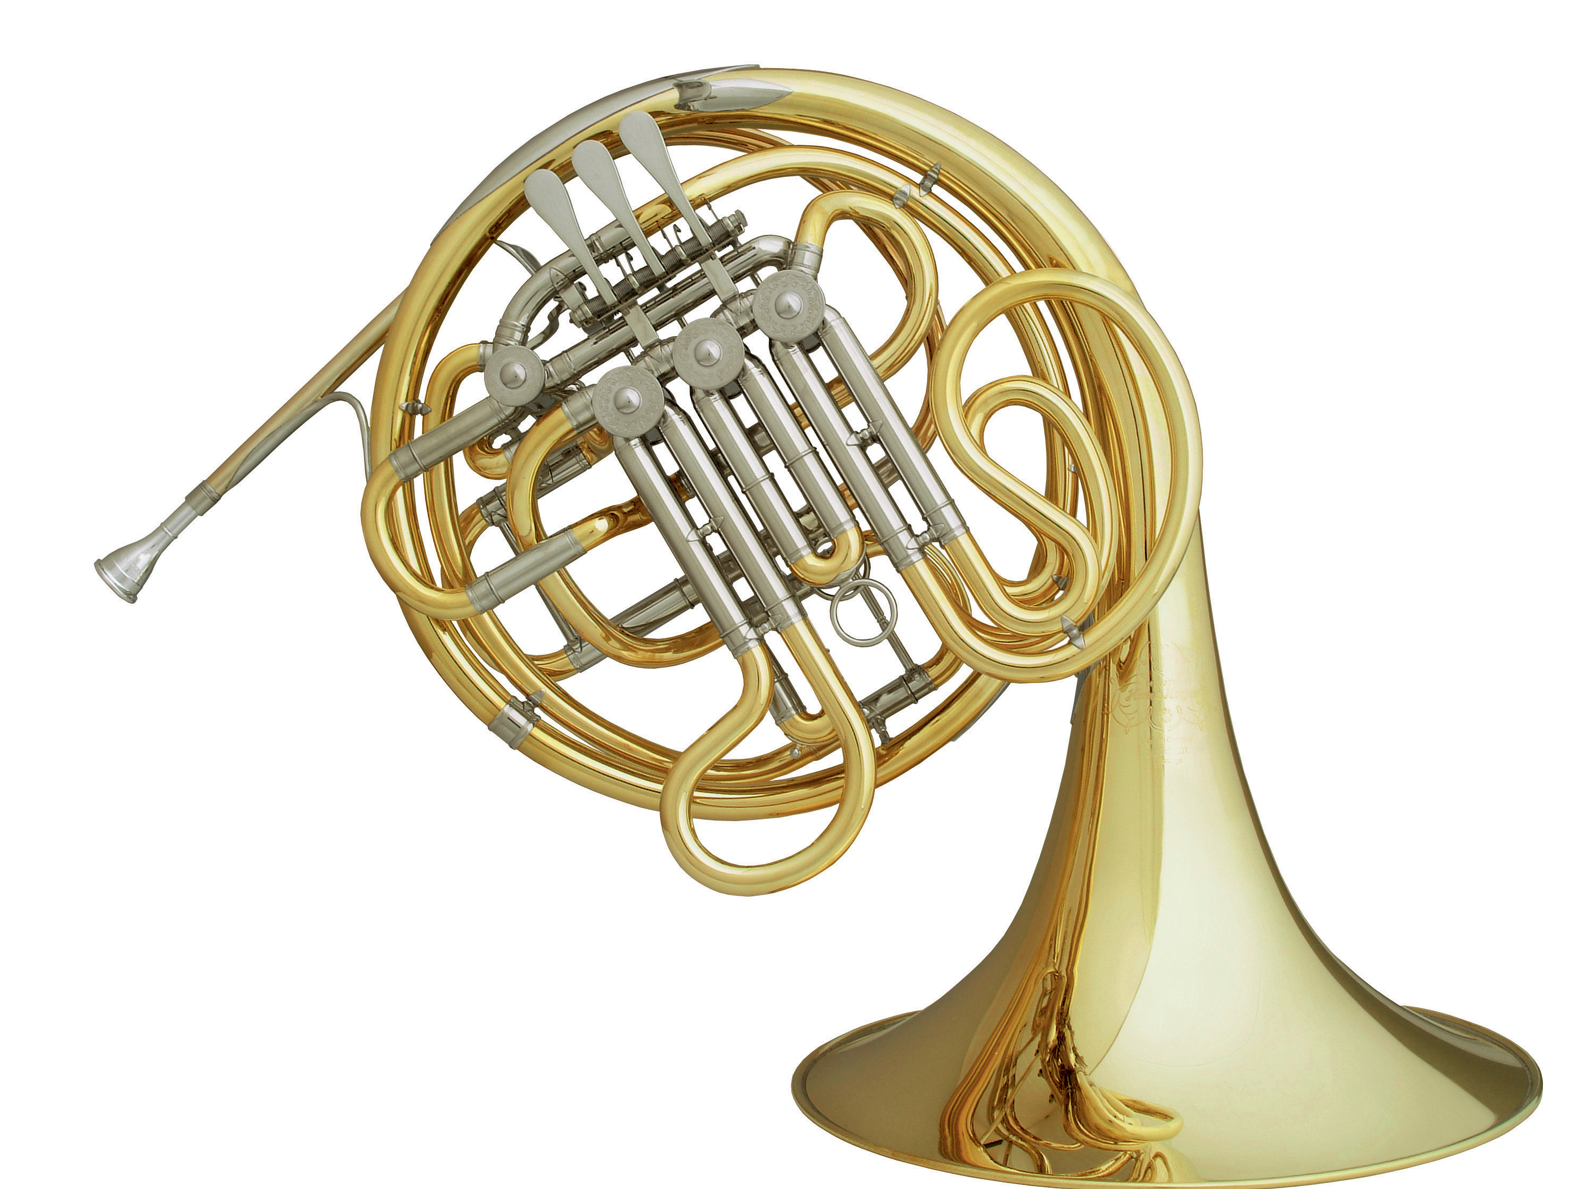 Hans Hoyer 801A-L Double Horn right handed - Vogt instruments